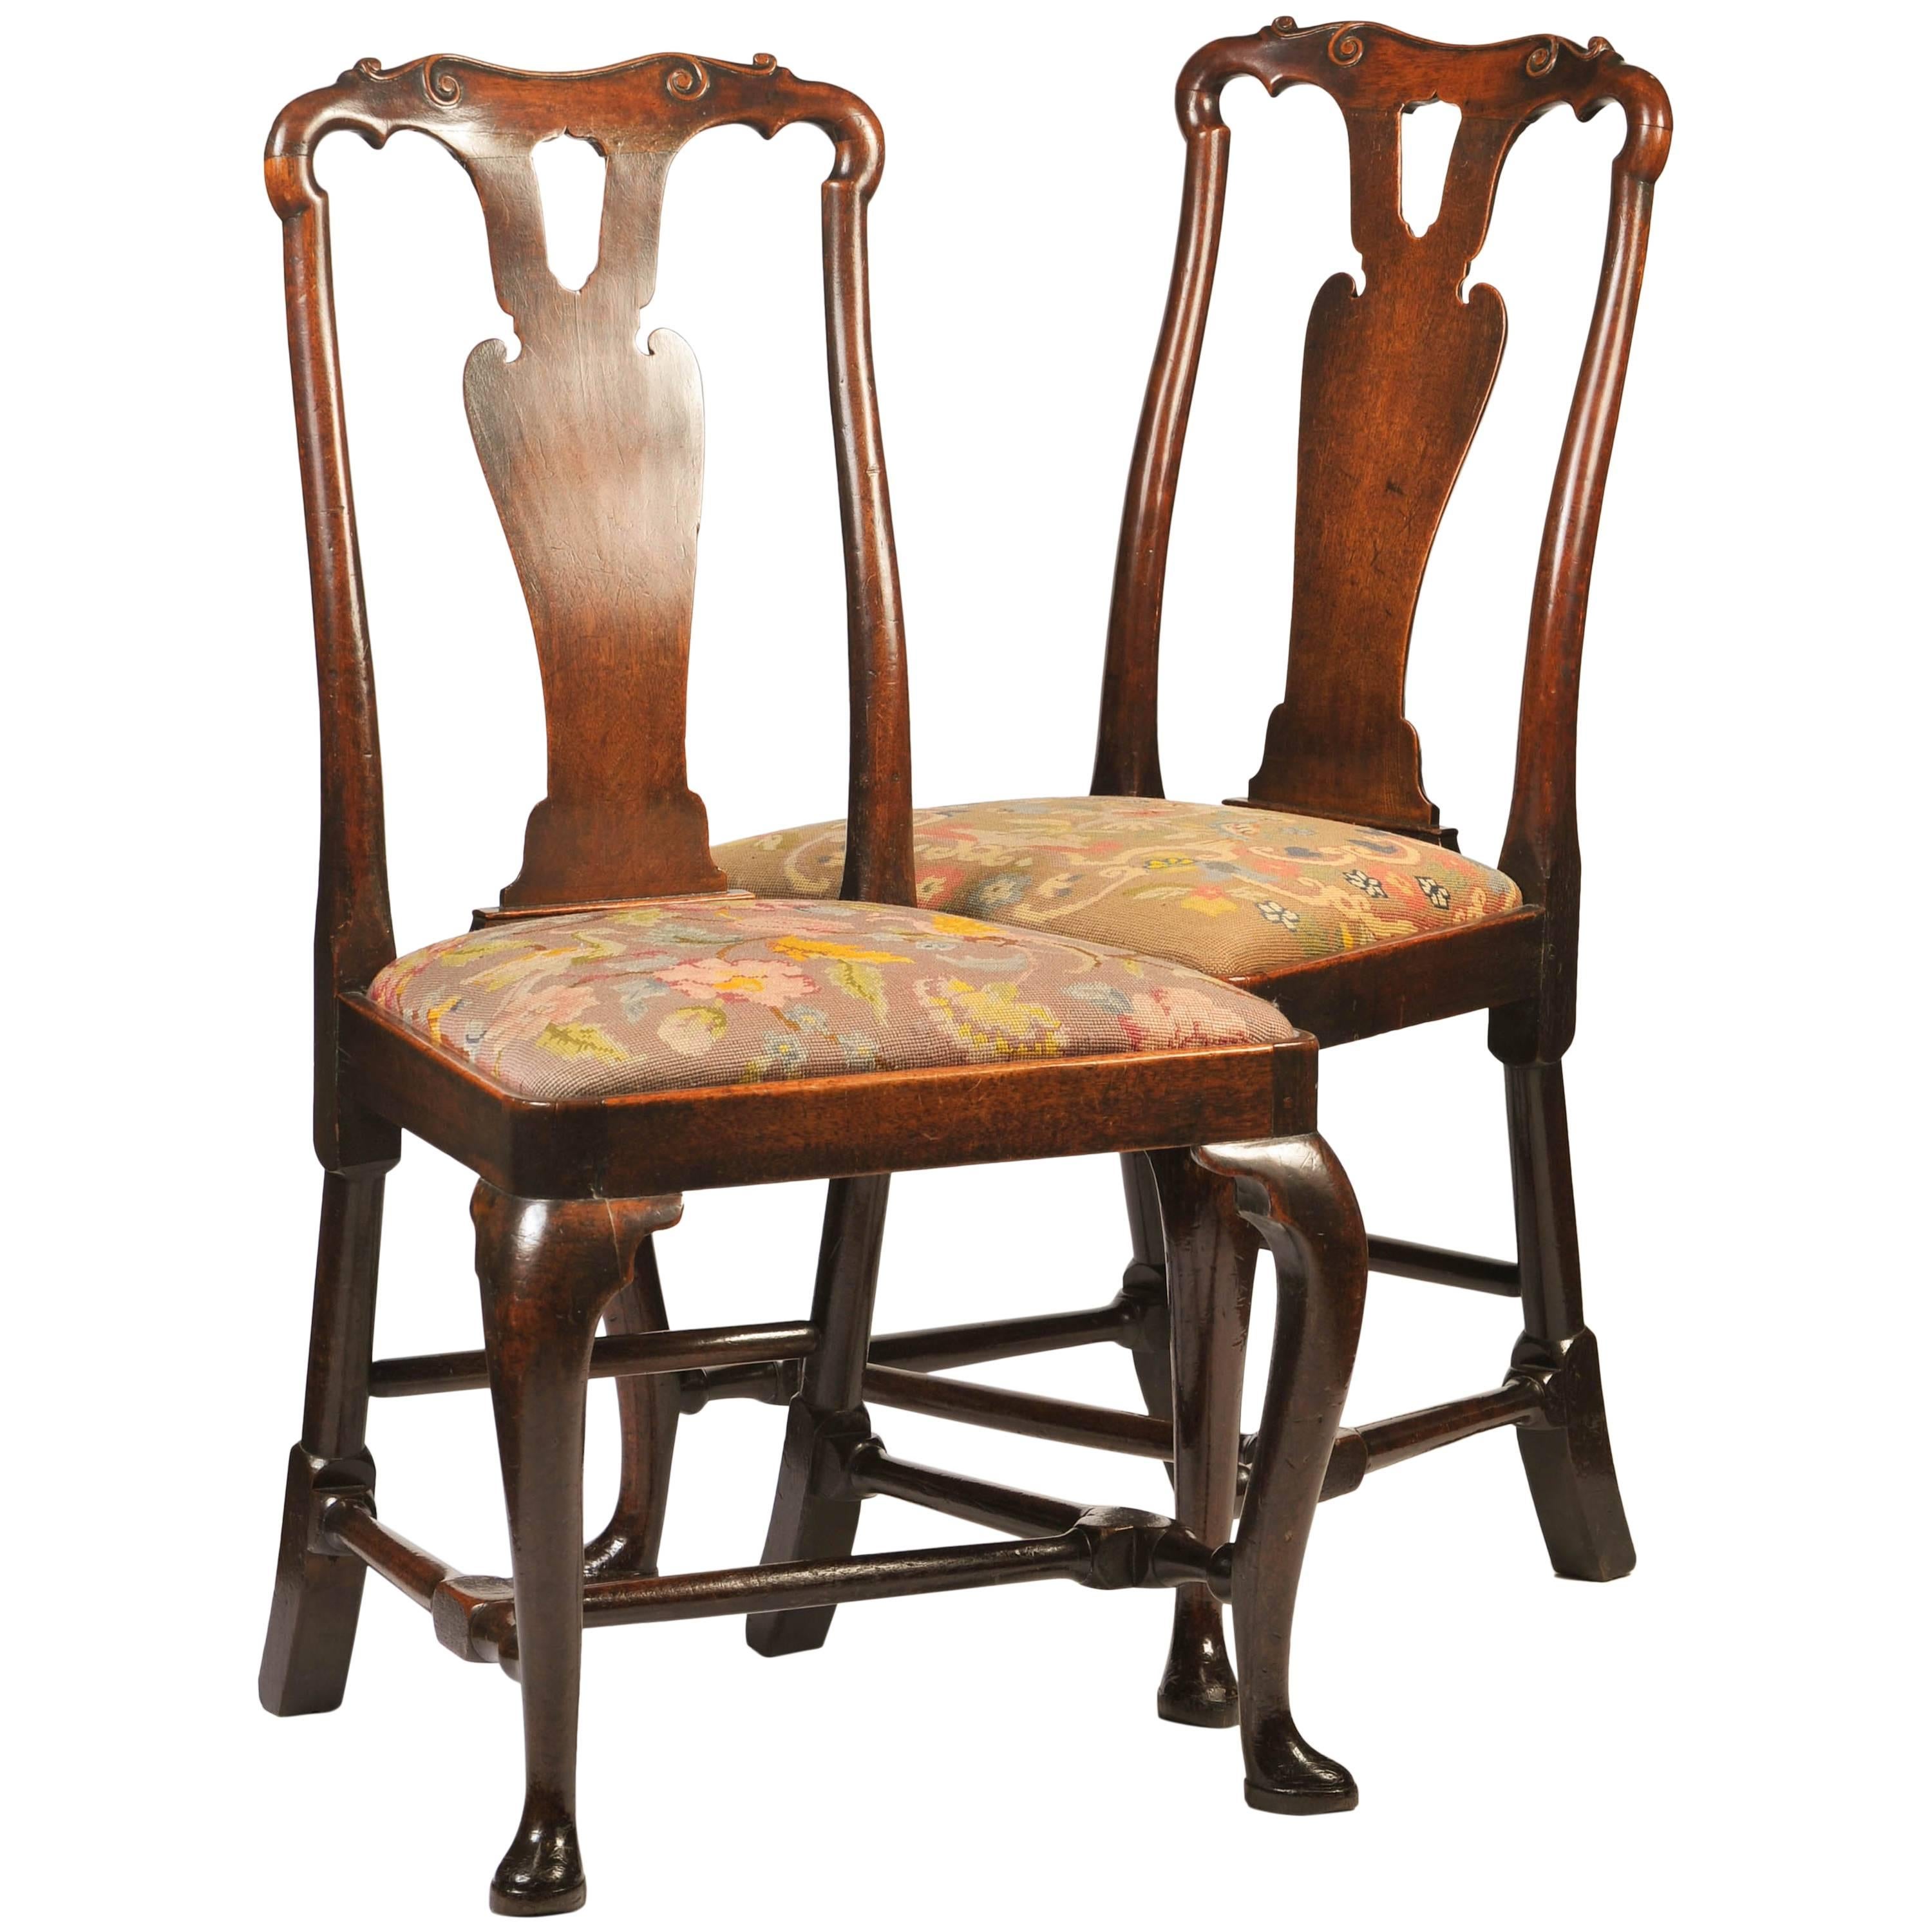 Pair of Early 18th Century Walnut Chairs